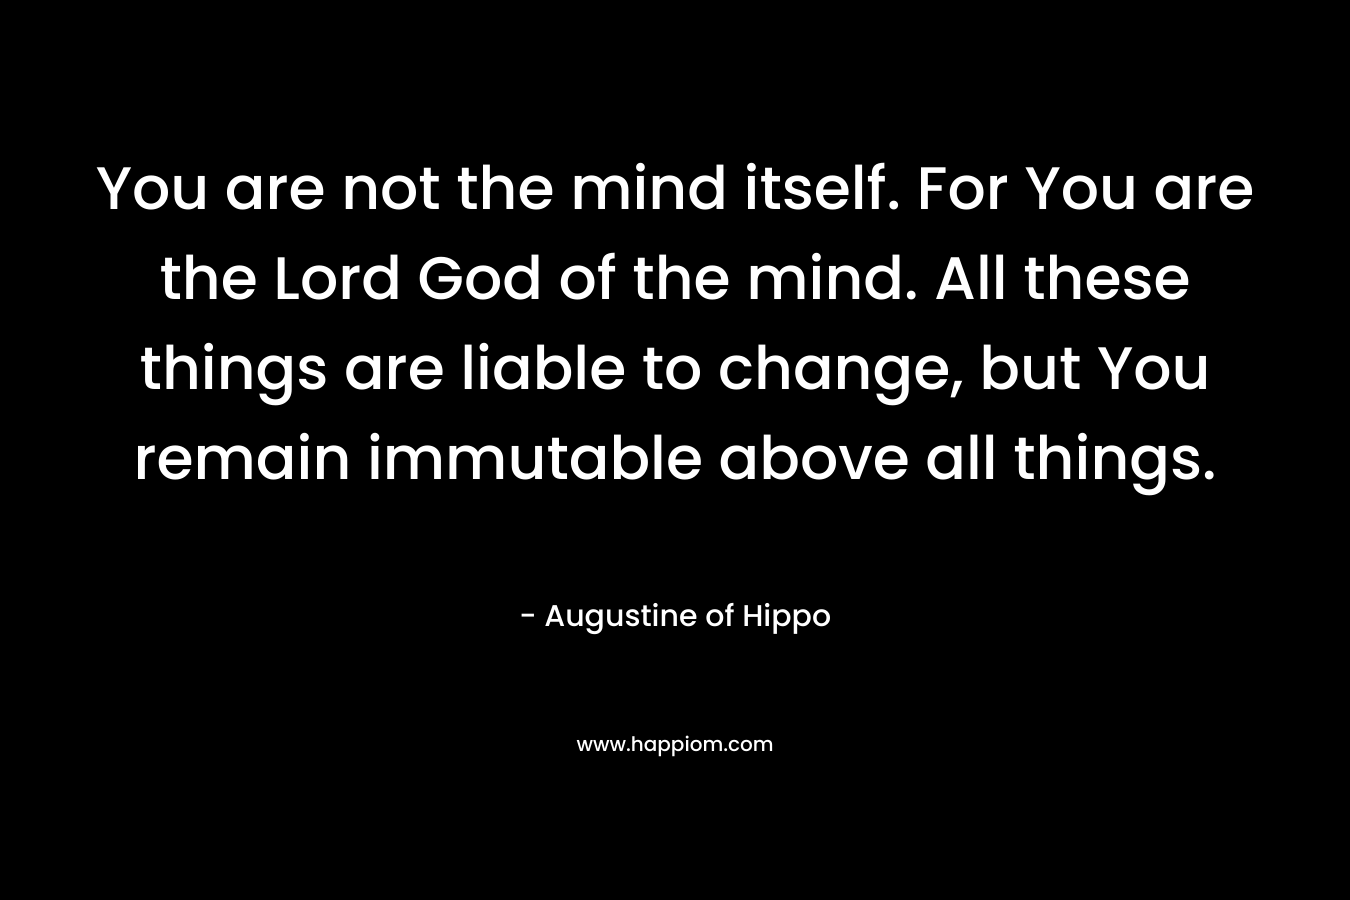 You are not the mind itself. For You are the Lord God of the mind. All these things are liable to change, but You remain immutable above all things.